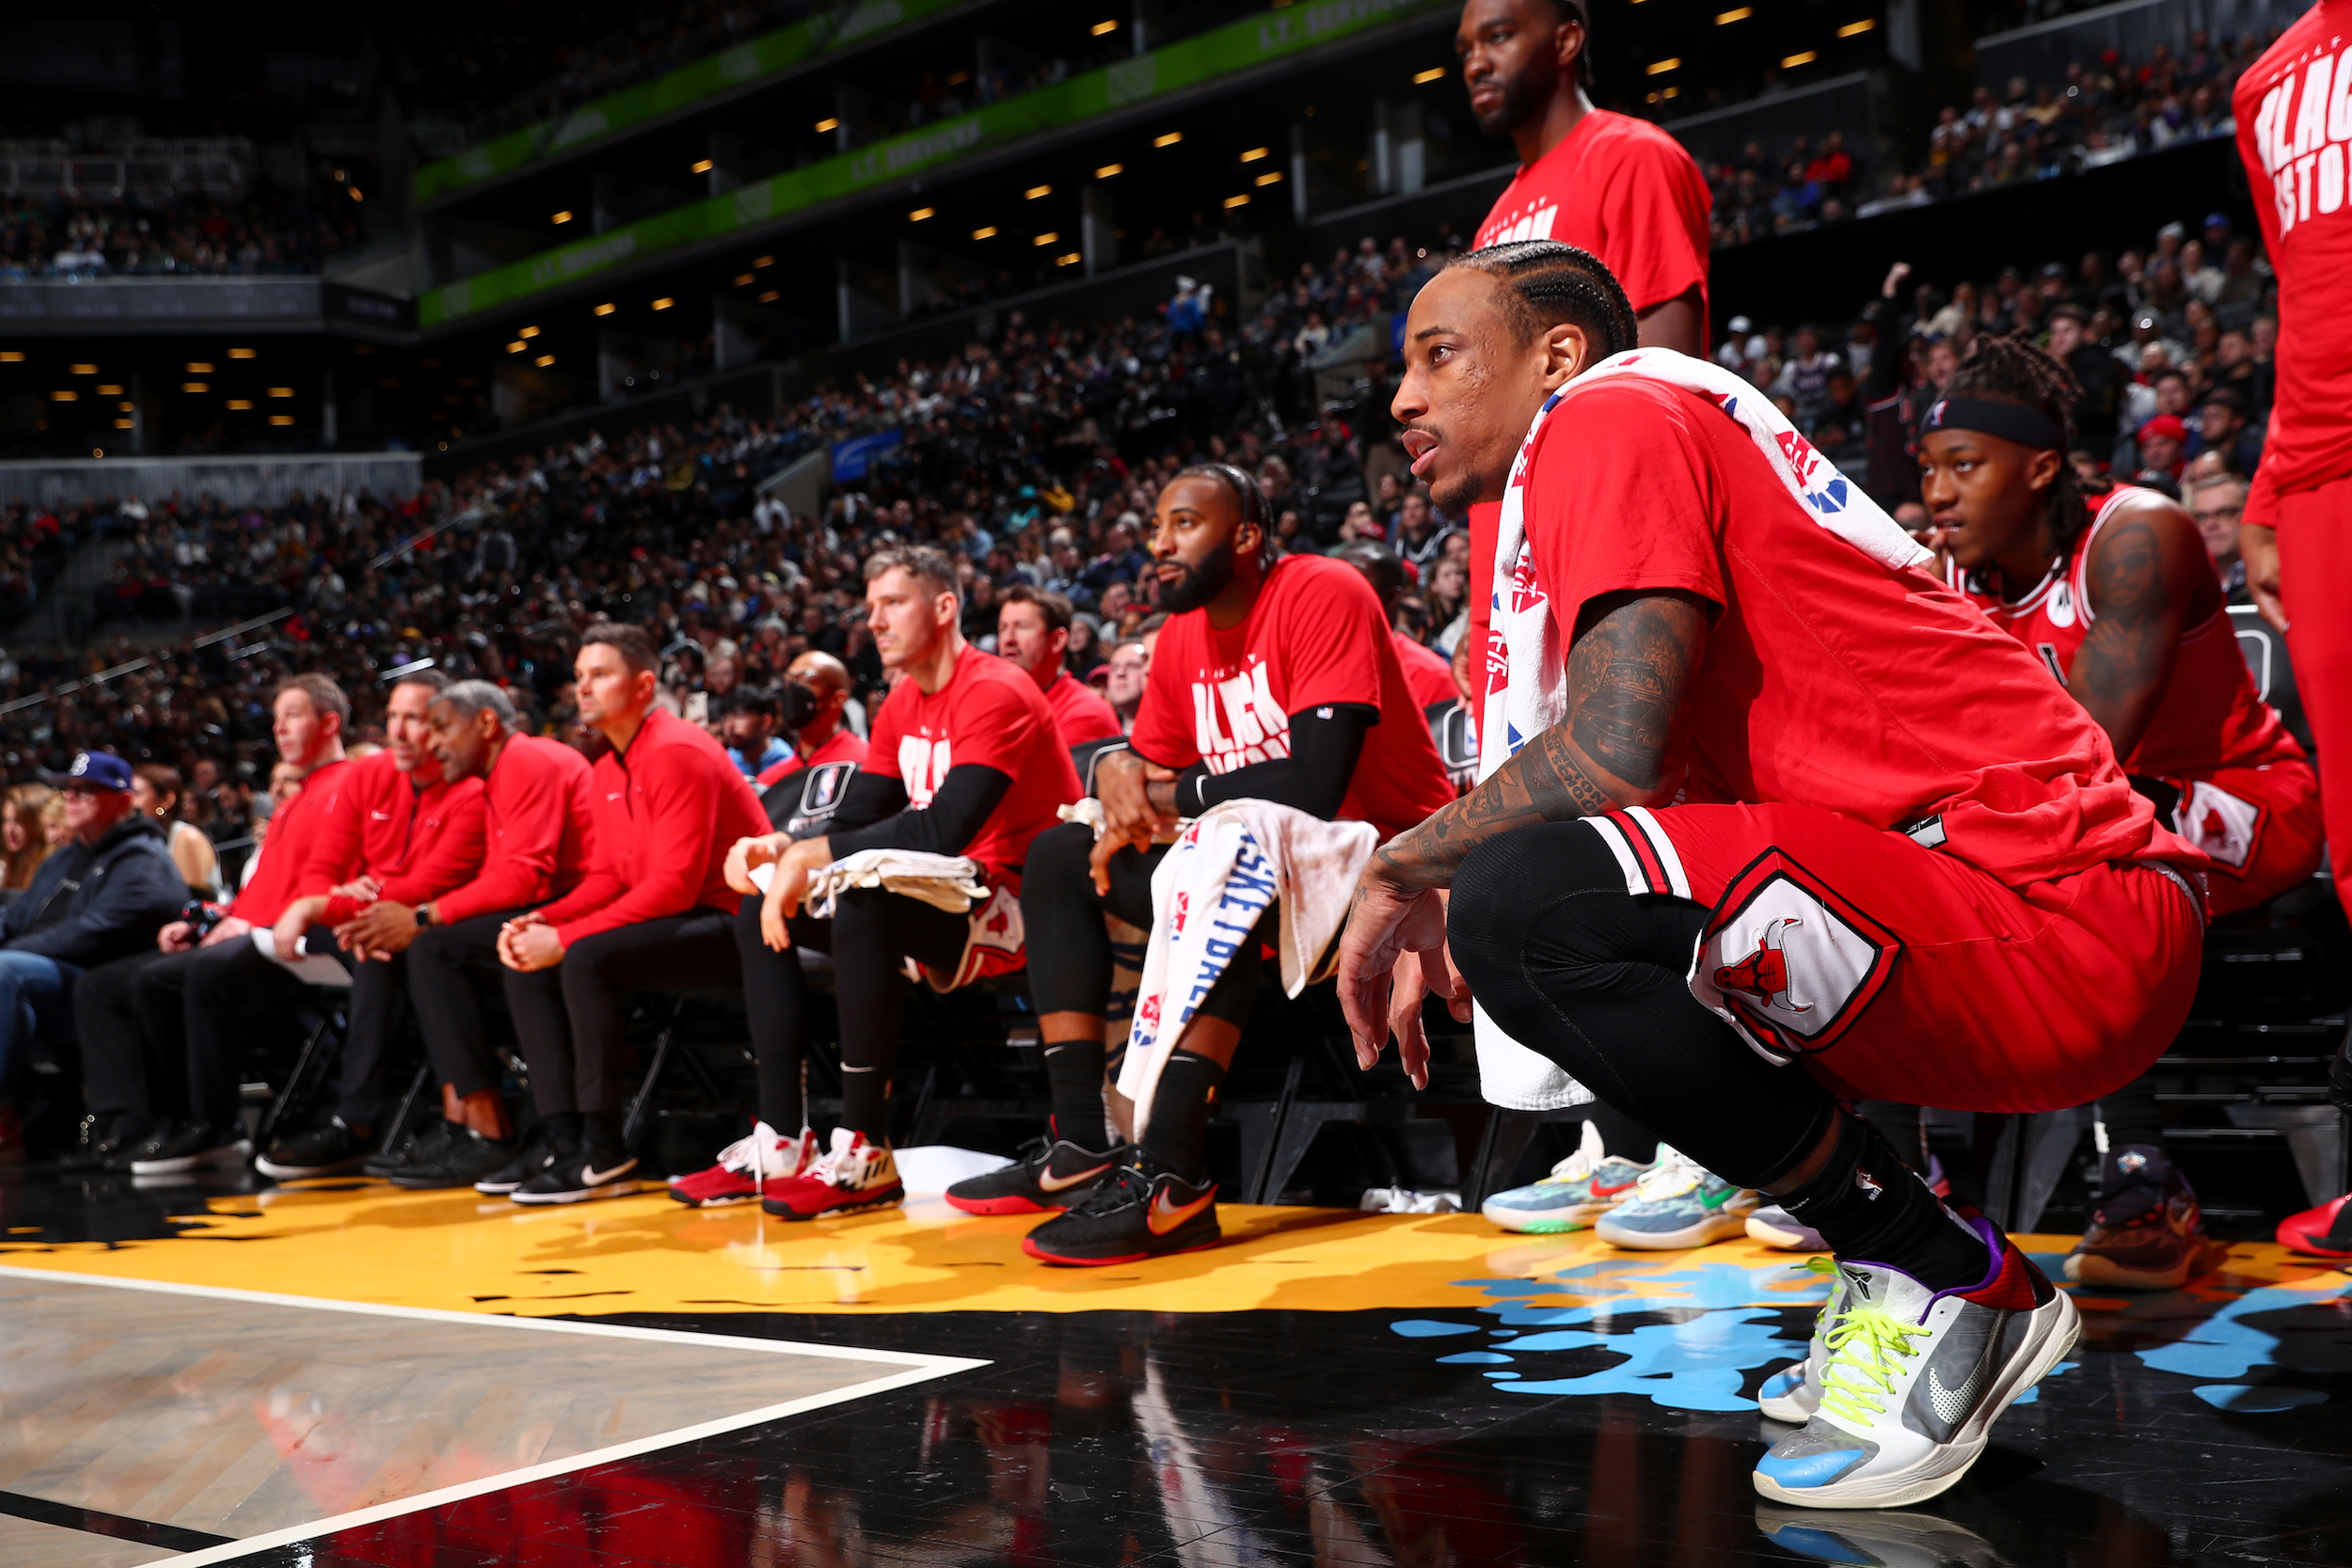 Bulls players watch from the bench.